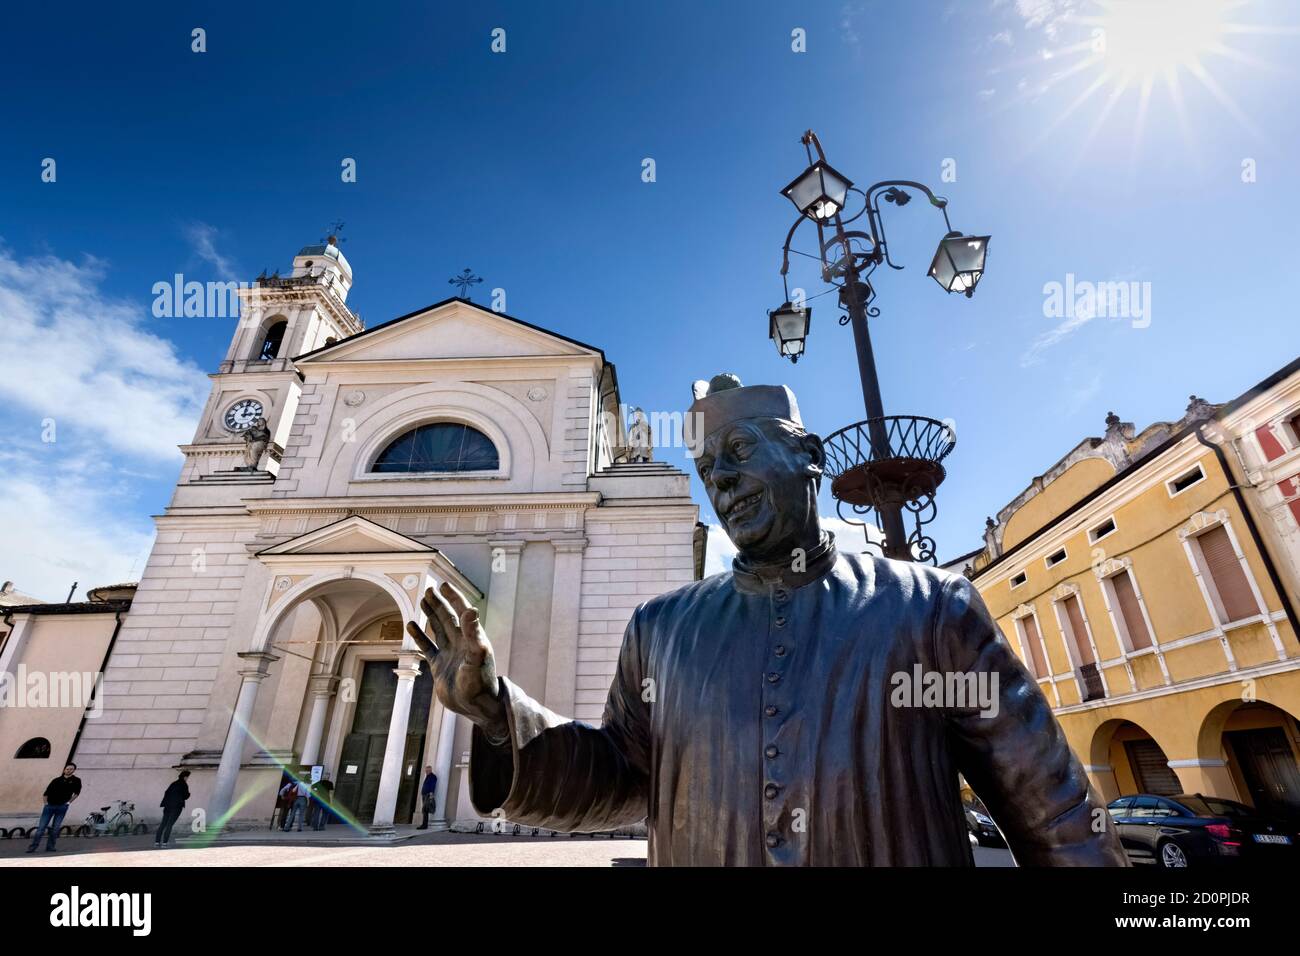 Brescello: the statue of Don Camillo and the Santa Maria Nascente church. The village is famous for the films of Don Camillo and Peppone. Italy. Stock Photo